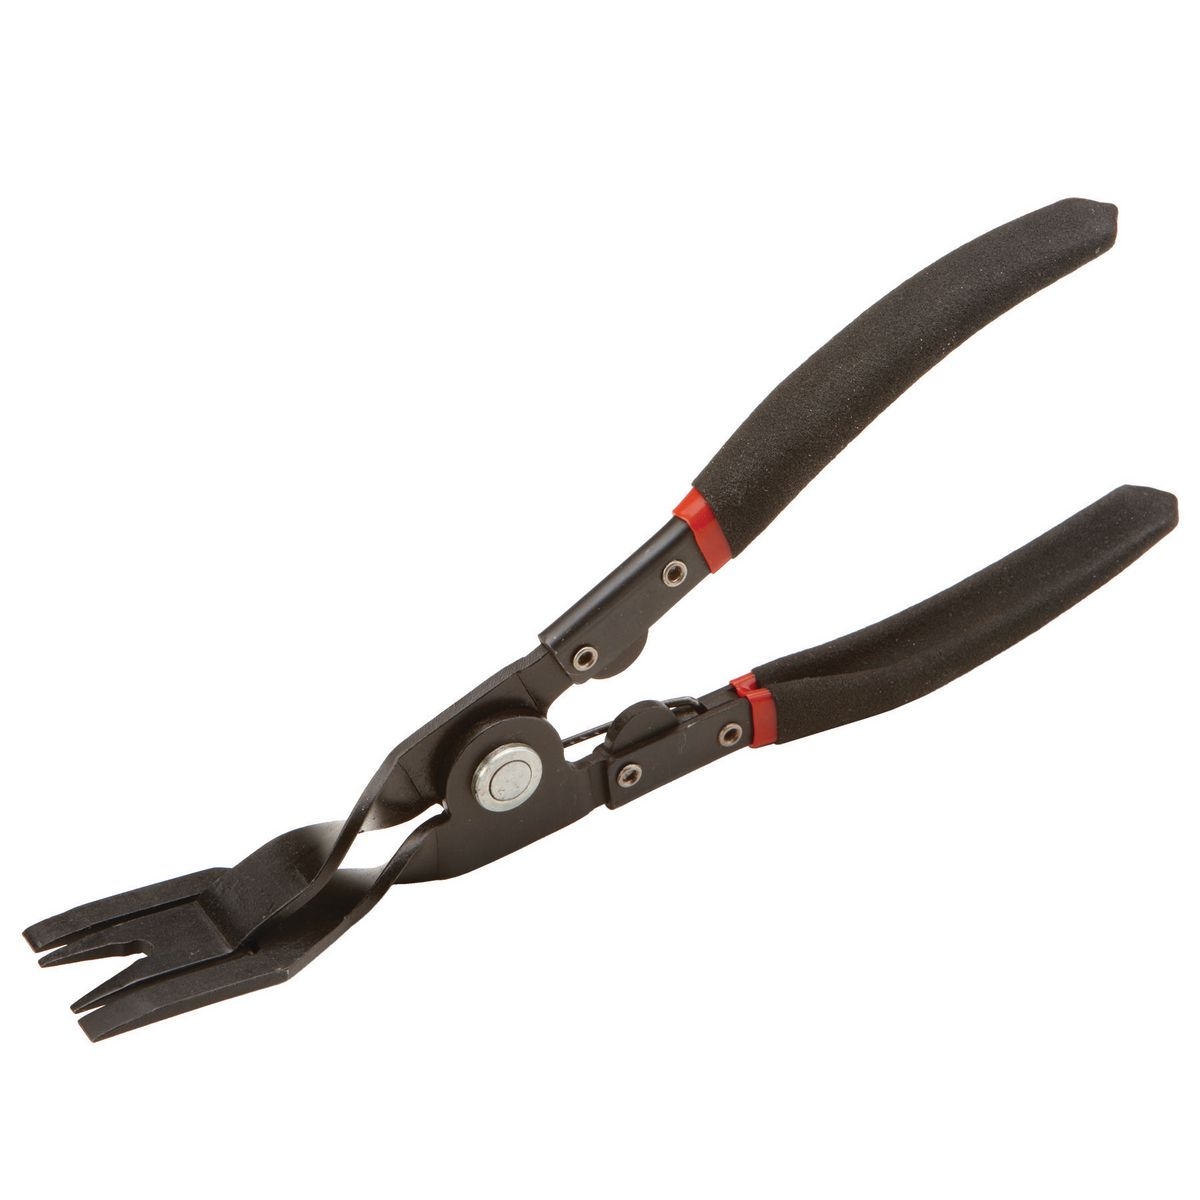 PITTSBURGH Panel Clip Pliers - Item 63699 / 67399